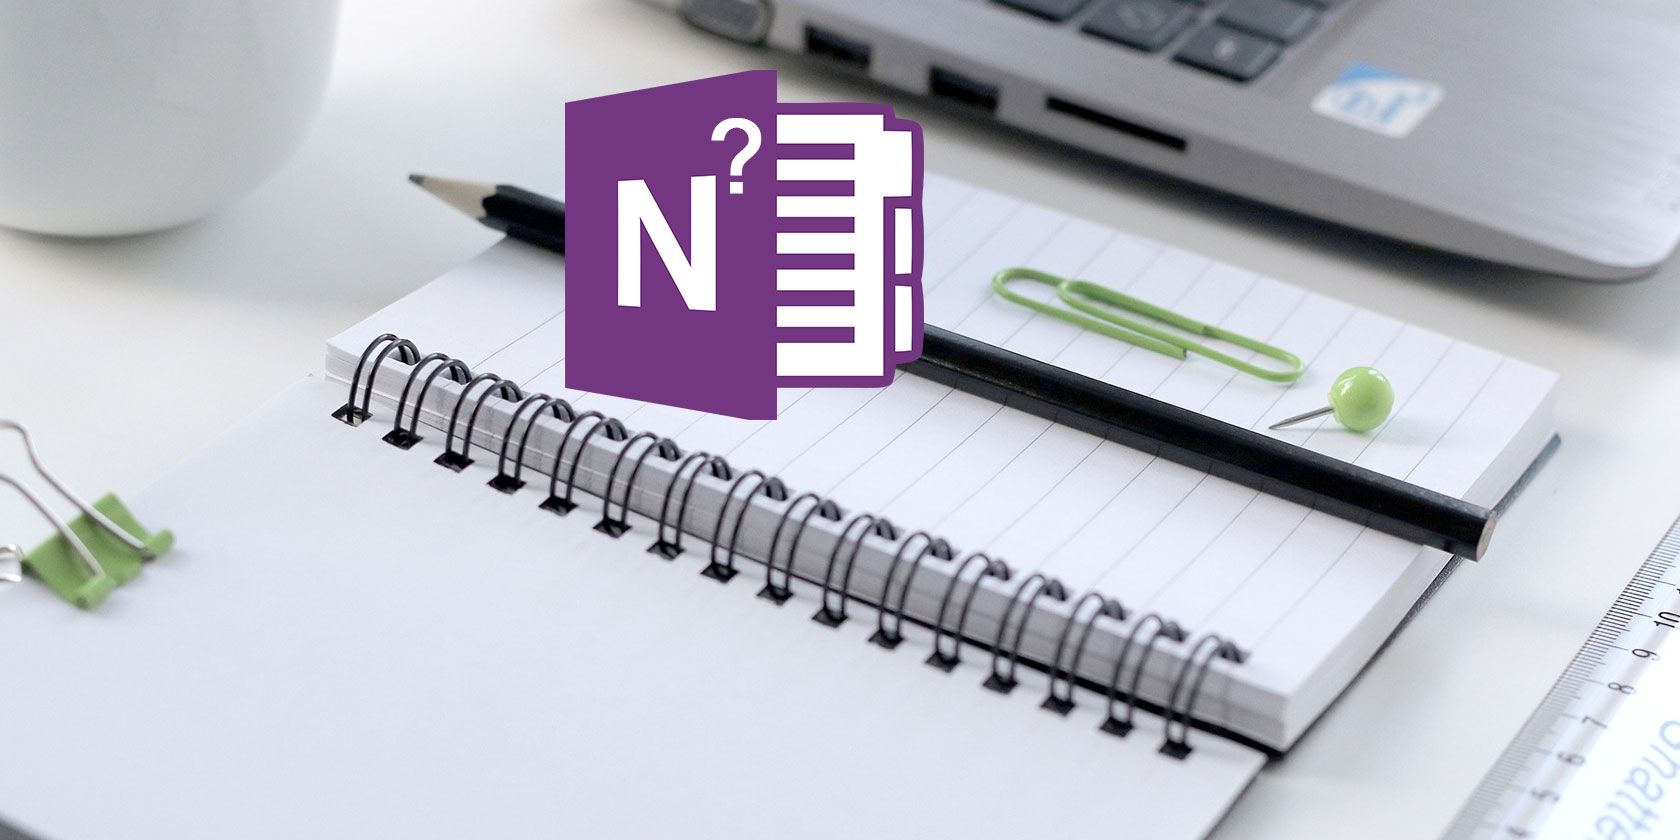 OneNote logo on top of a notebook